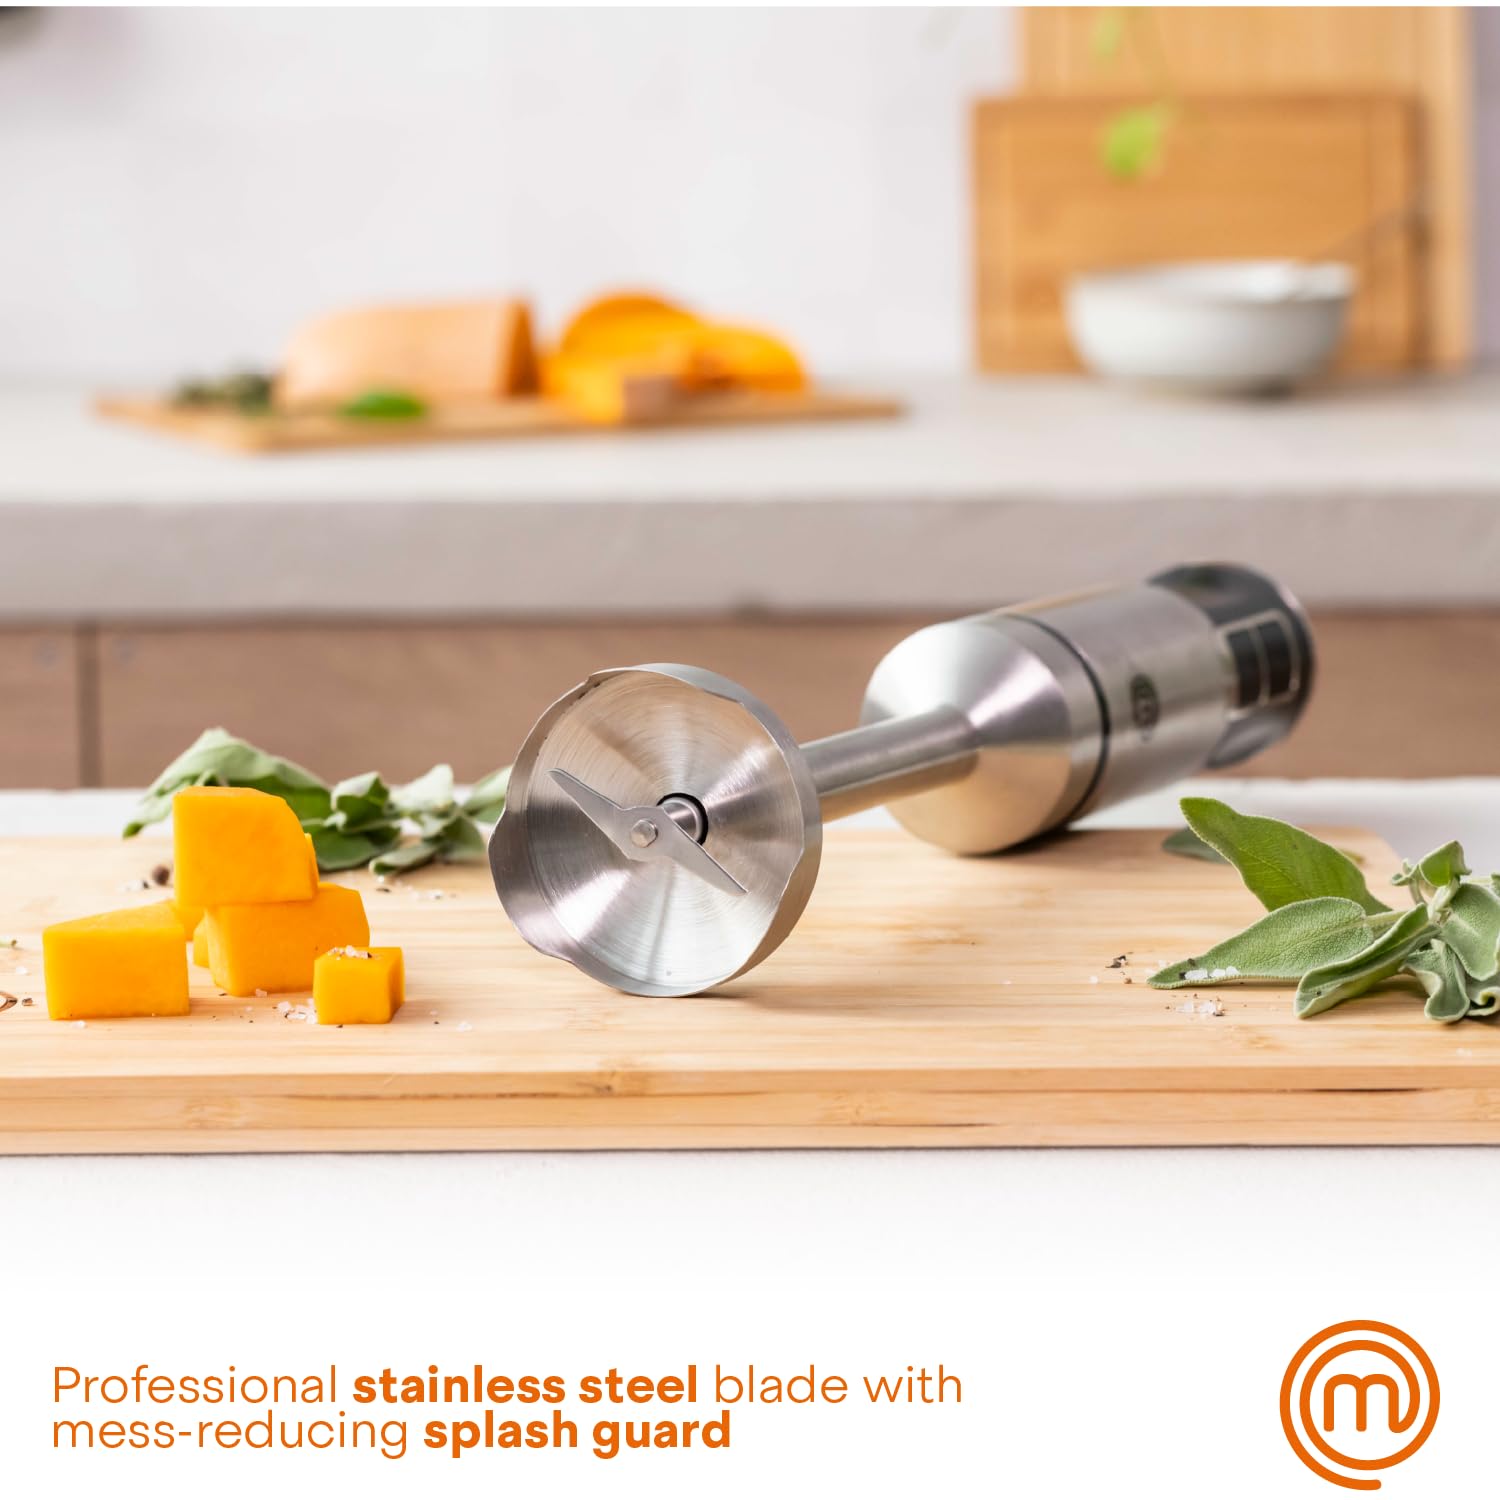 MasterChef Immersion Blender Handheld, Stainless Steel Hand Held Blending Stick Emulsifier, Puree Blender for Making Baby Food, Soup, Sauces etc, Powerful 400W Motor with Variable Speed Control